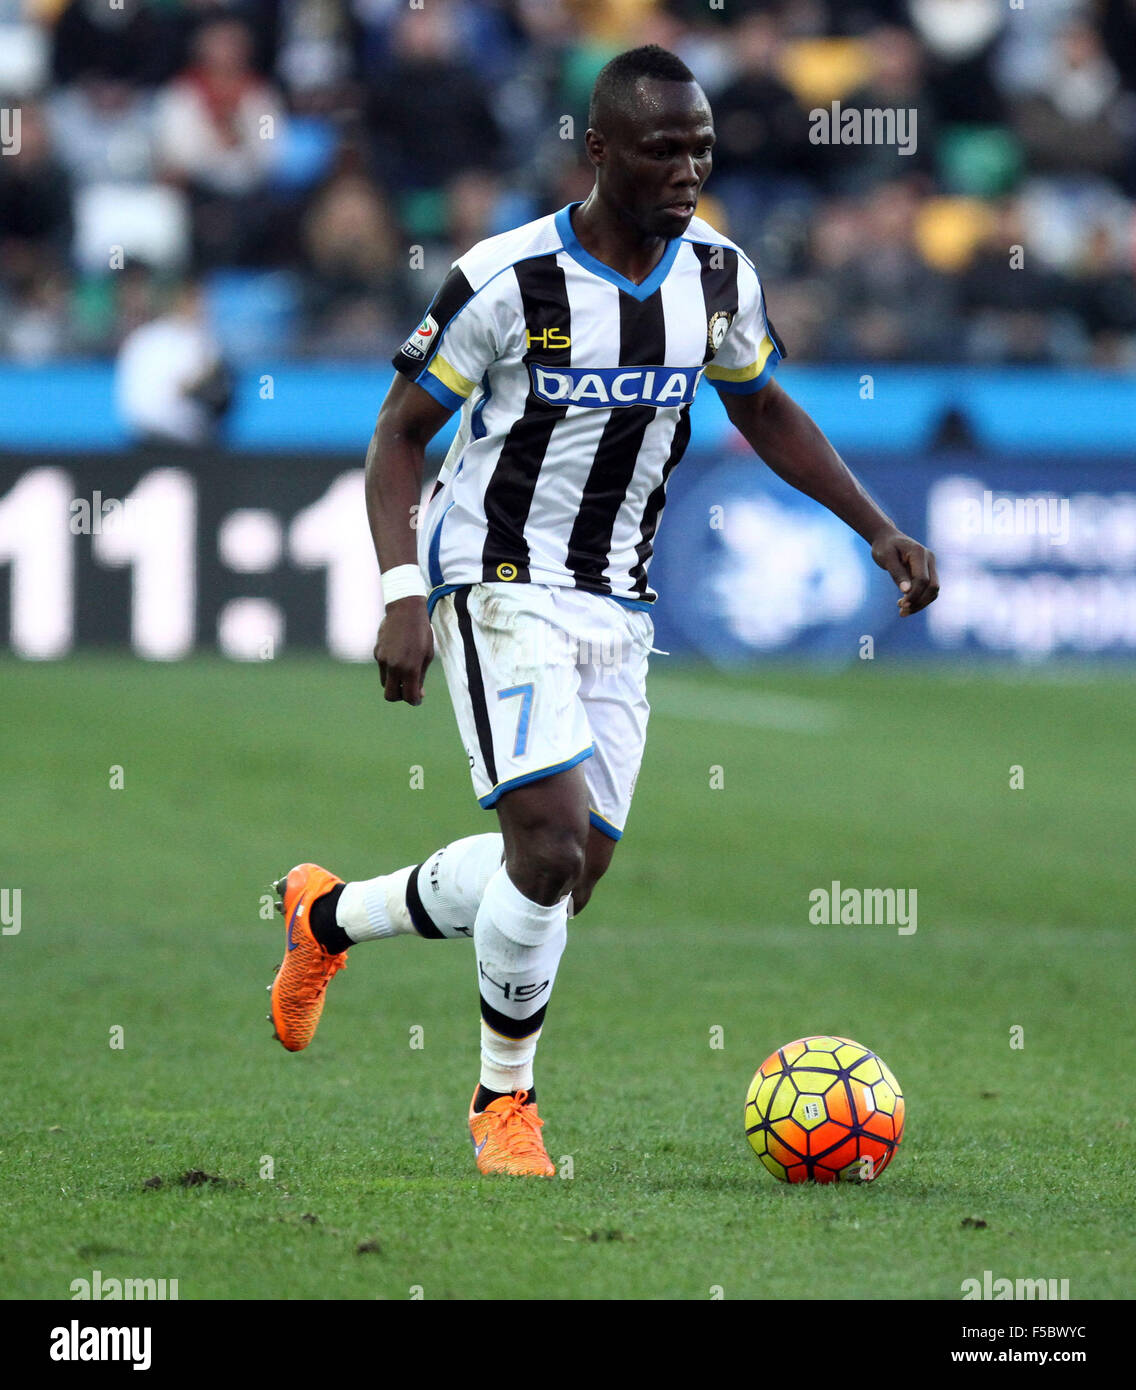 Udine, Italy. 1st November, 2015. Udinese's midfielder Emmanuel Agyemang Badu runs with the ball during the Italian Serie A football match between Udinese Calcio v Sassuolo Calcio at Friuli Stadium on 1st November, 2015 in Udine. Credit:  Andrea Spinelli/Alamy Live News Stock Photo